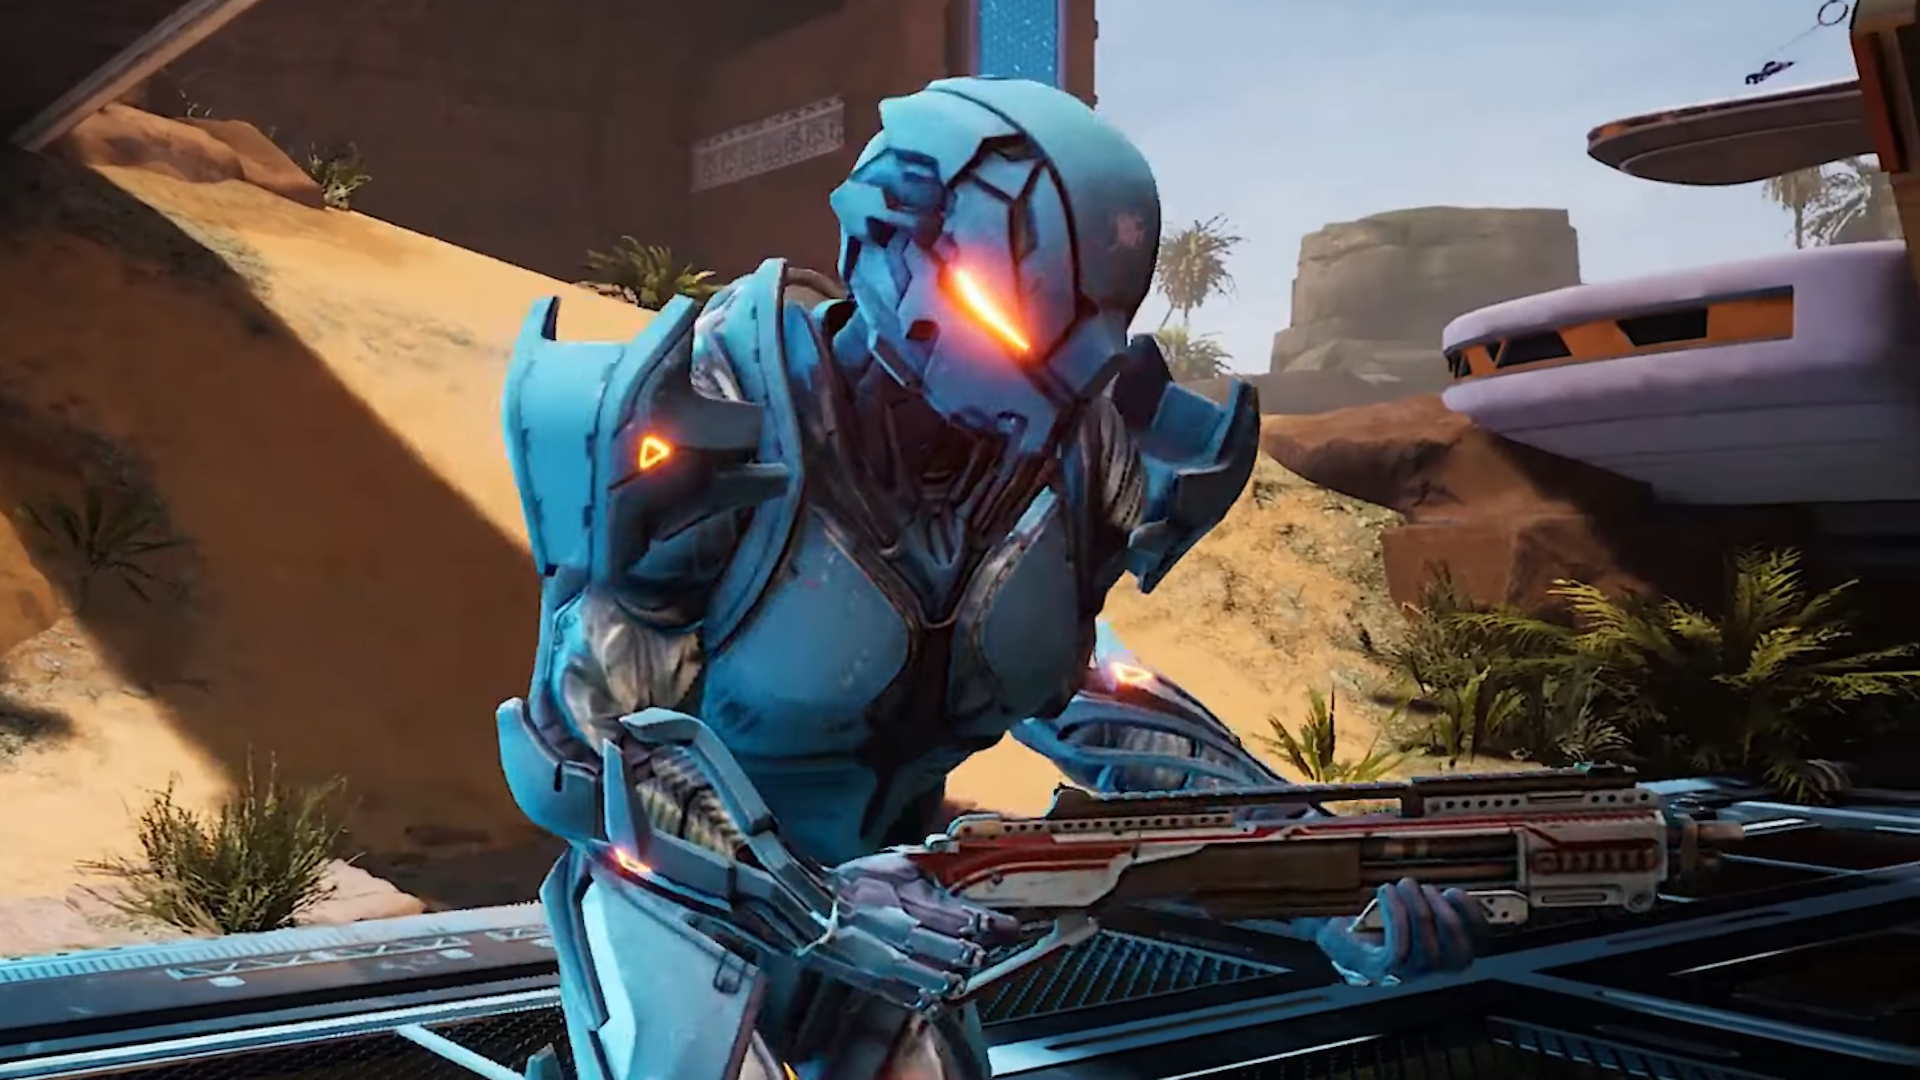 Splitgate: Arena Warfare Announced Free-to-Play Launch Date